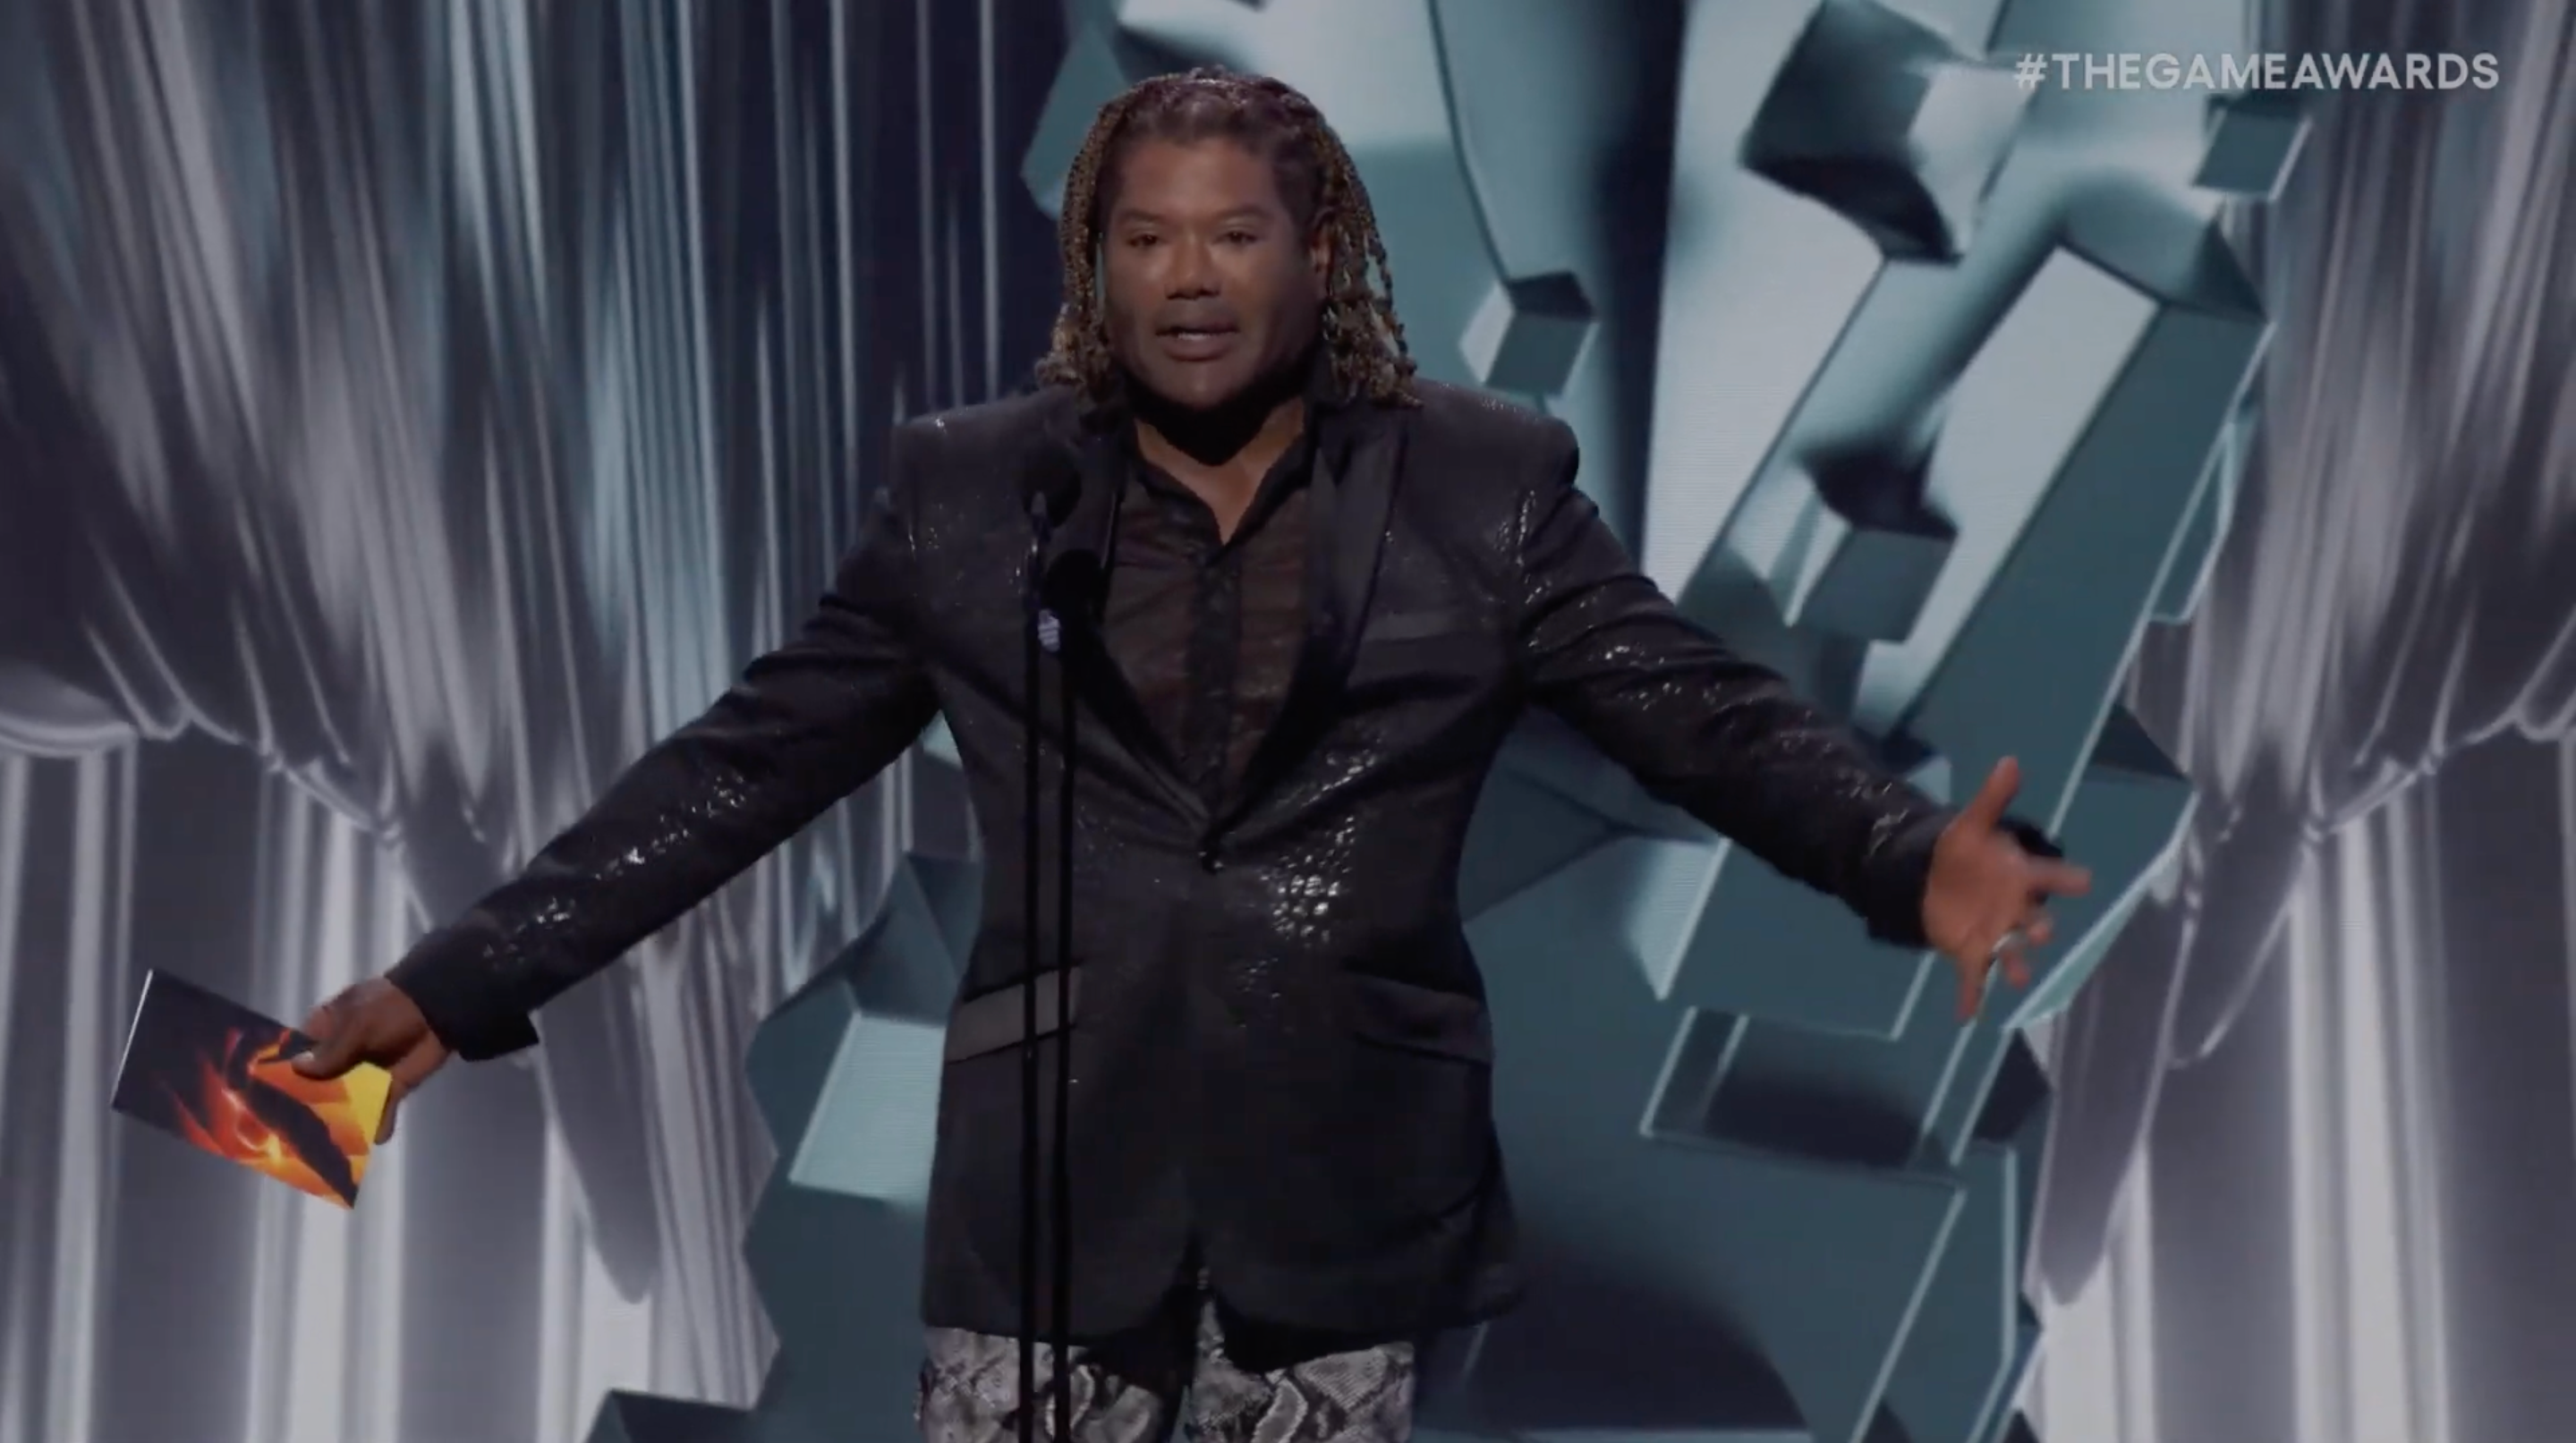 Christopher Judge (w/ @sunny) presents his own Game Award to himself. , read it boy